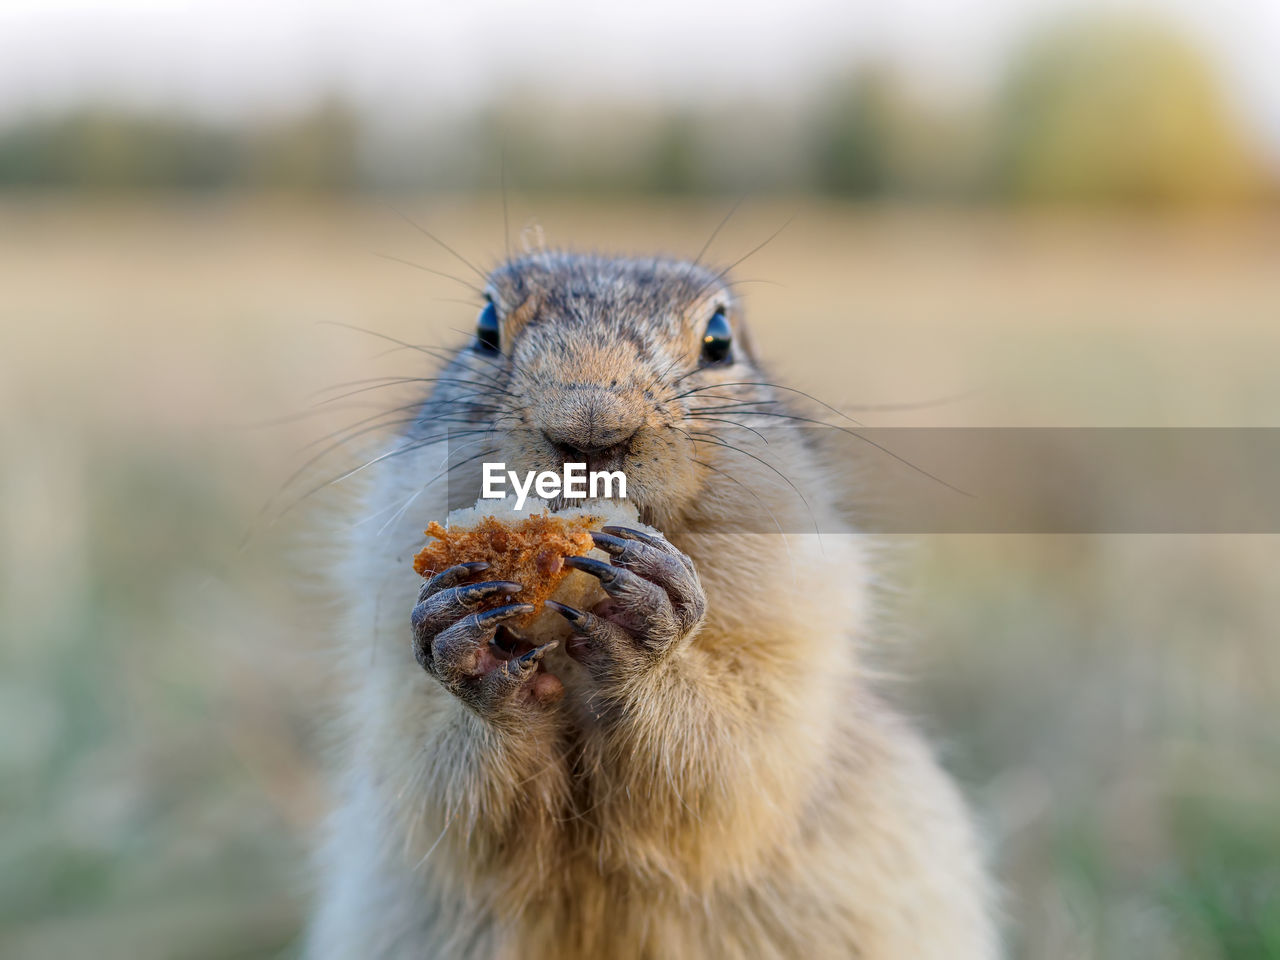 animal themes, animal, animal wildlife, one animal, mammal, squirrel, wildlife, whiskers, rodent, portrait, prairie dog, no people, looking at camera, eating, focus on foreground, nature, close-up, animal body part, outdoors, food, cute, day, food and drink, animal hair